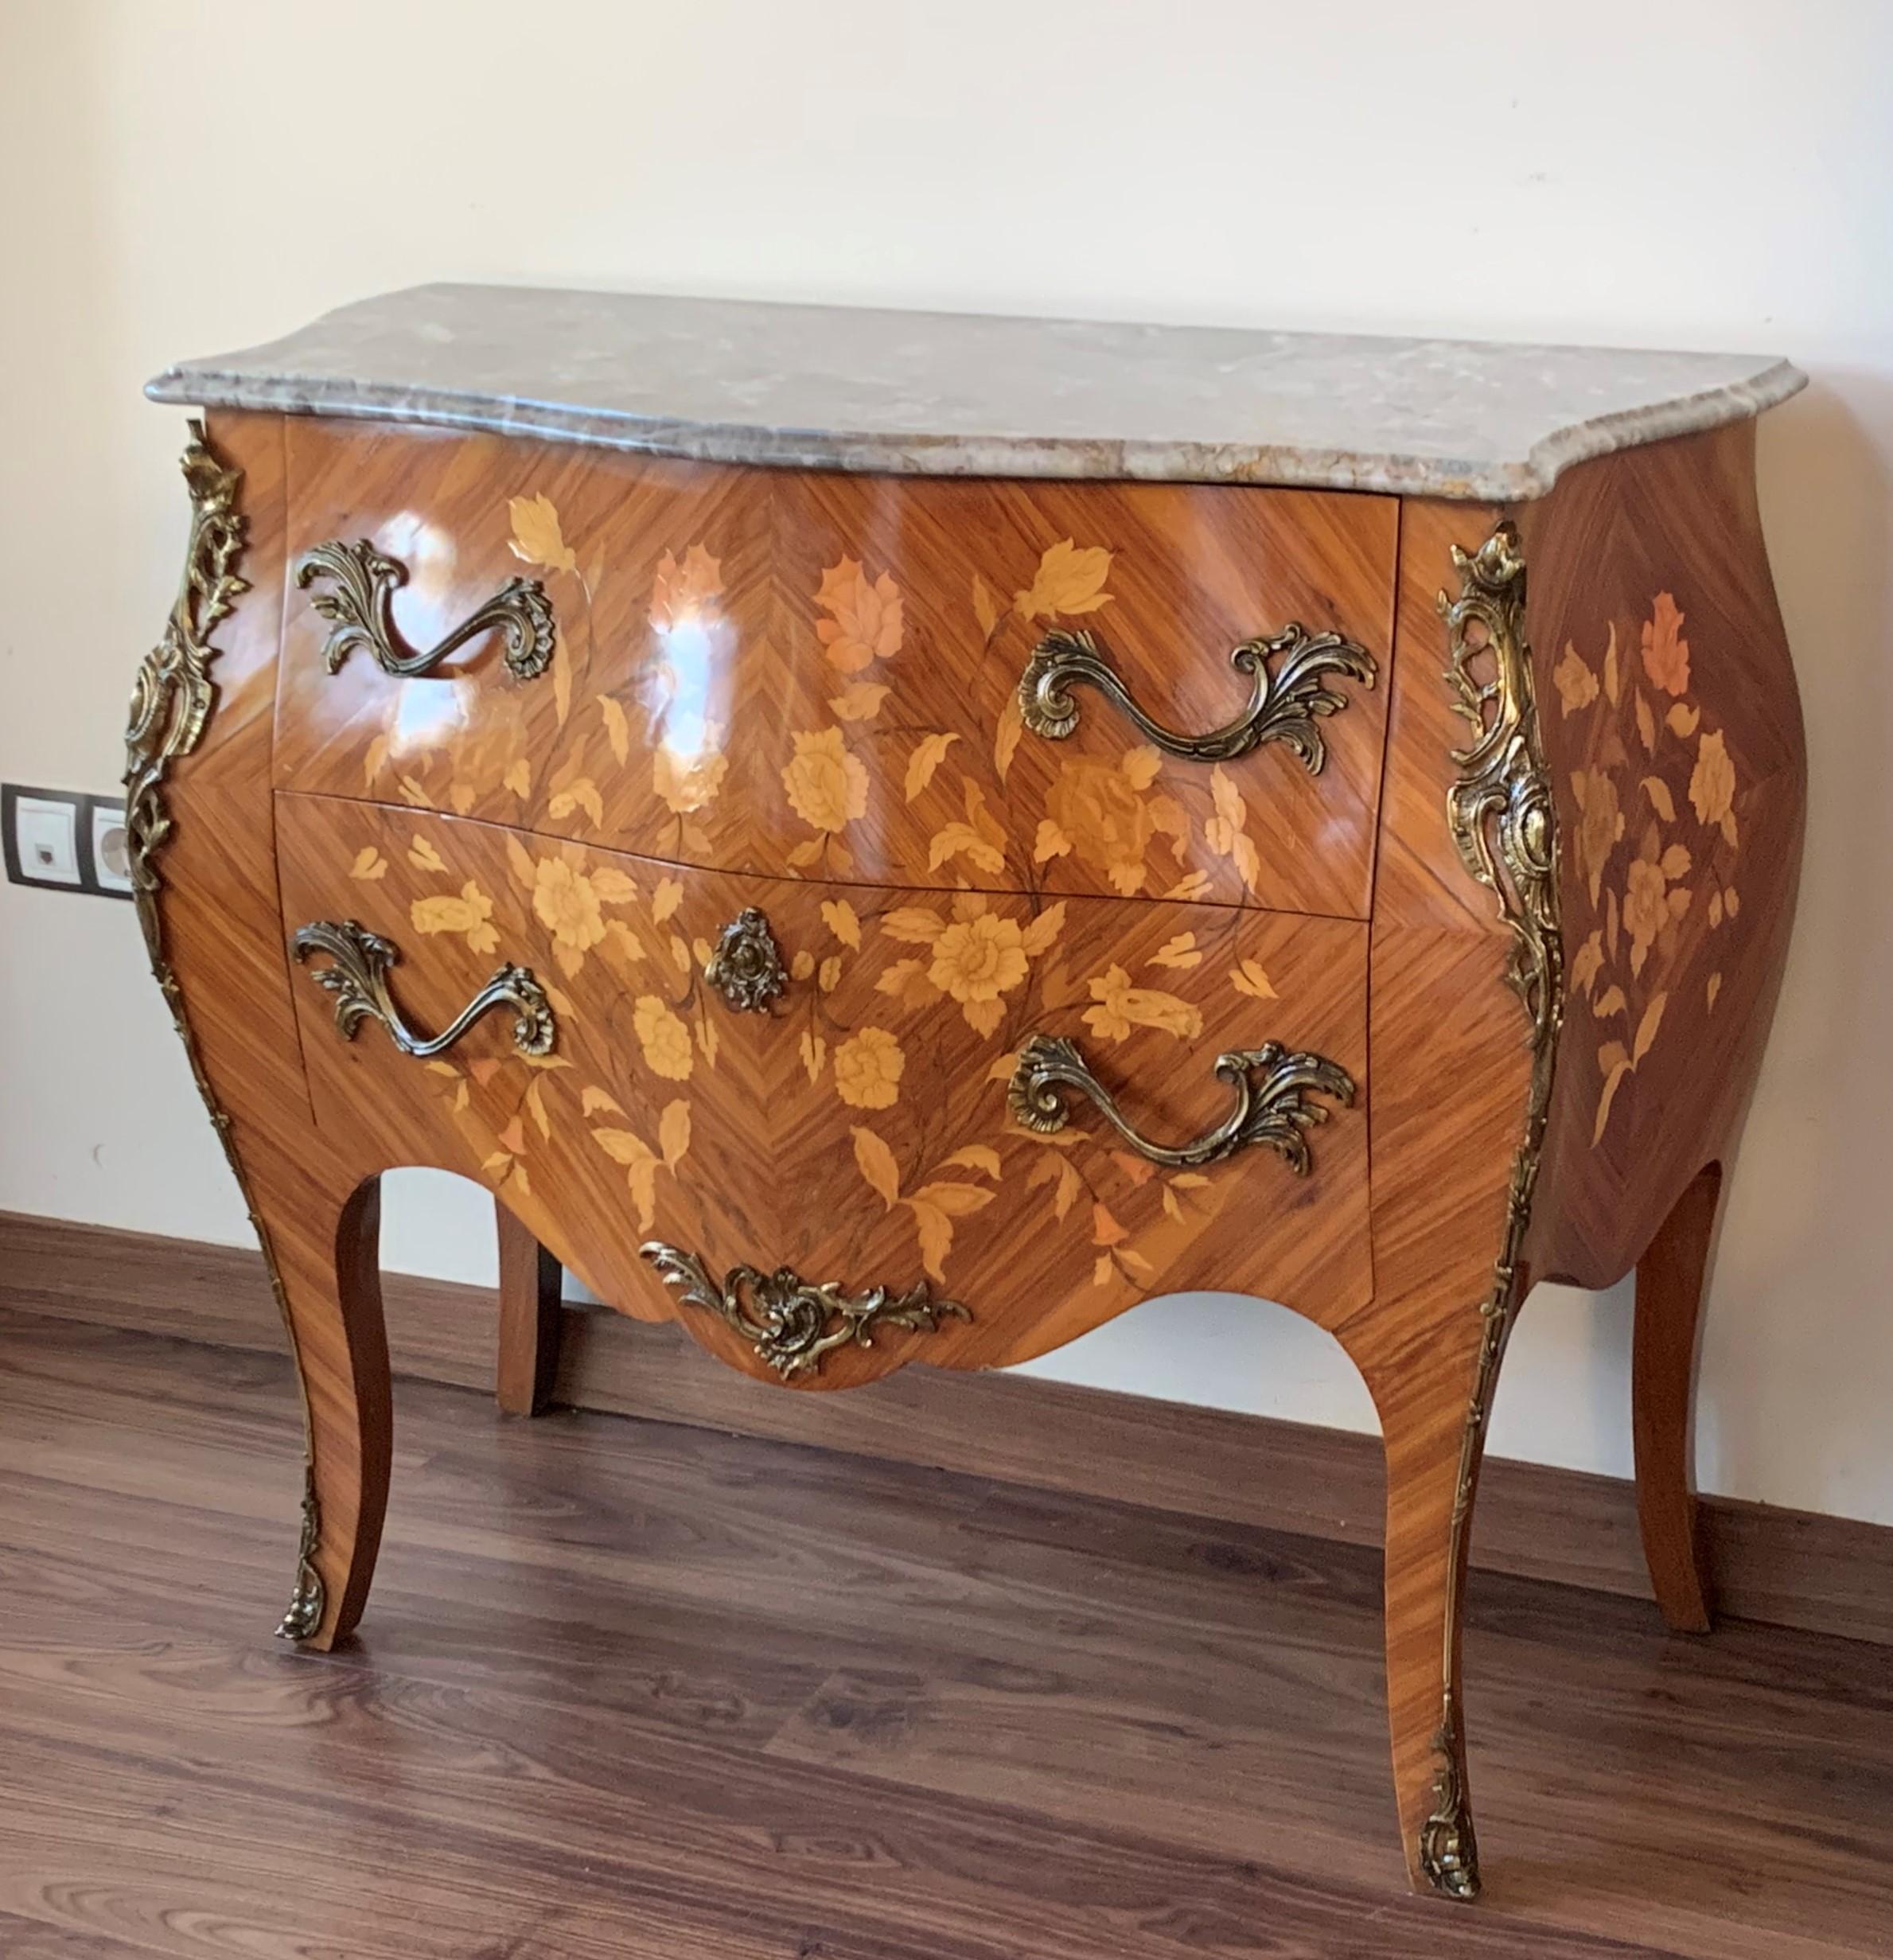 20th Century French Louis XV Style Fine Kingwood and Marquetry Ormolu Mounted Bombe Commode For Sale